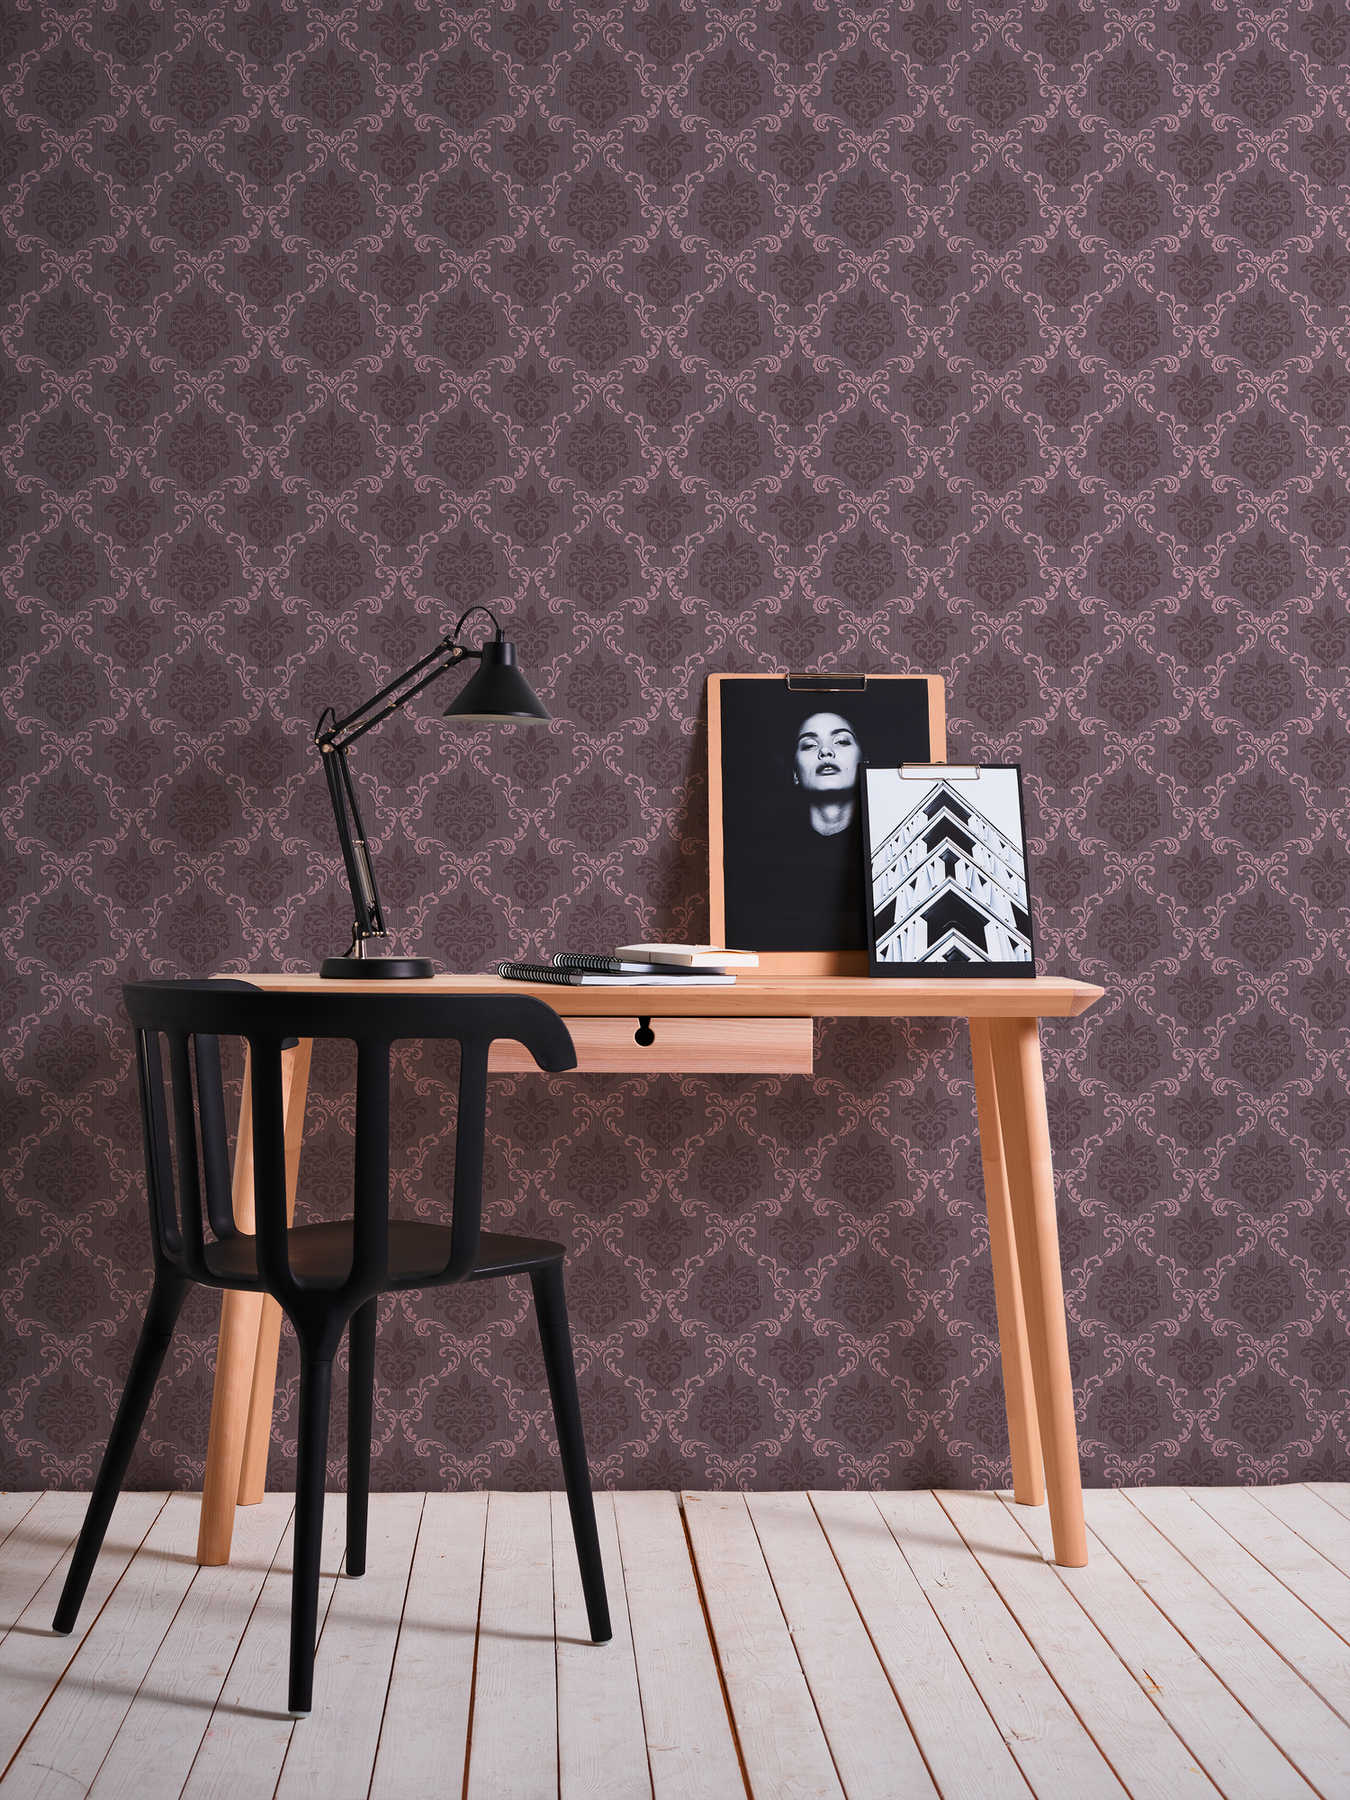             Baroque wallpaper with ornaments & textured pattern - purple
        